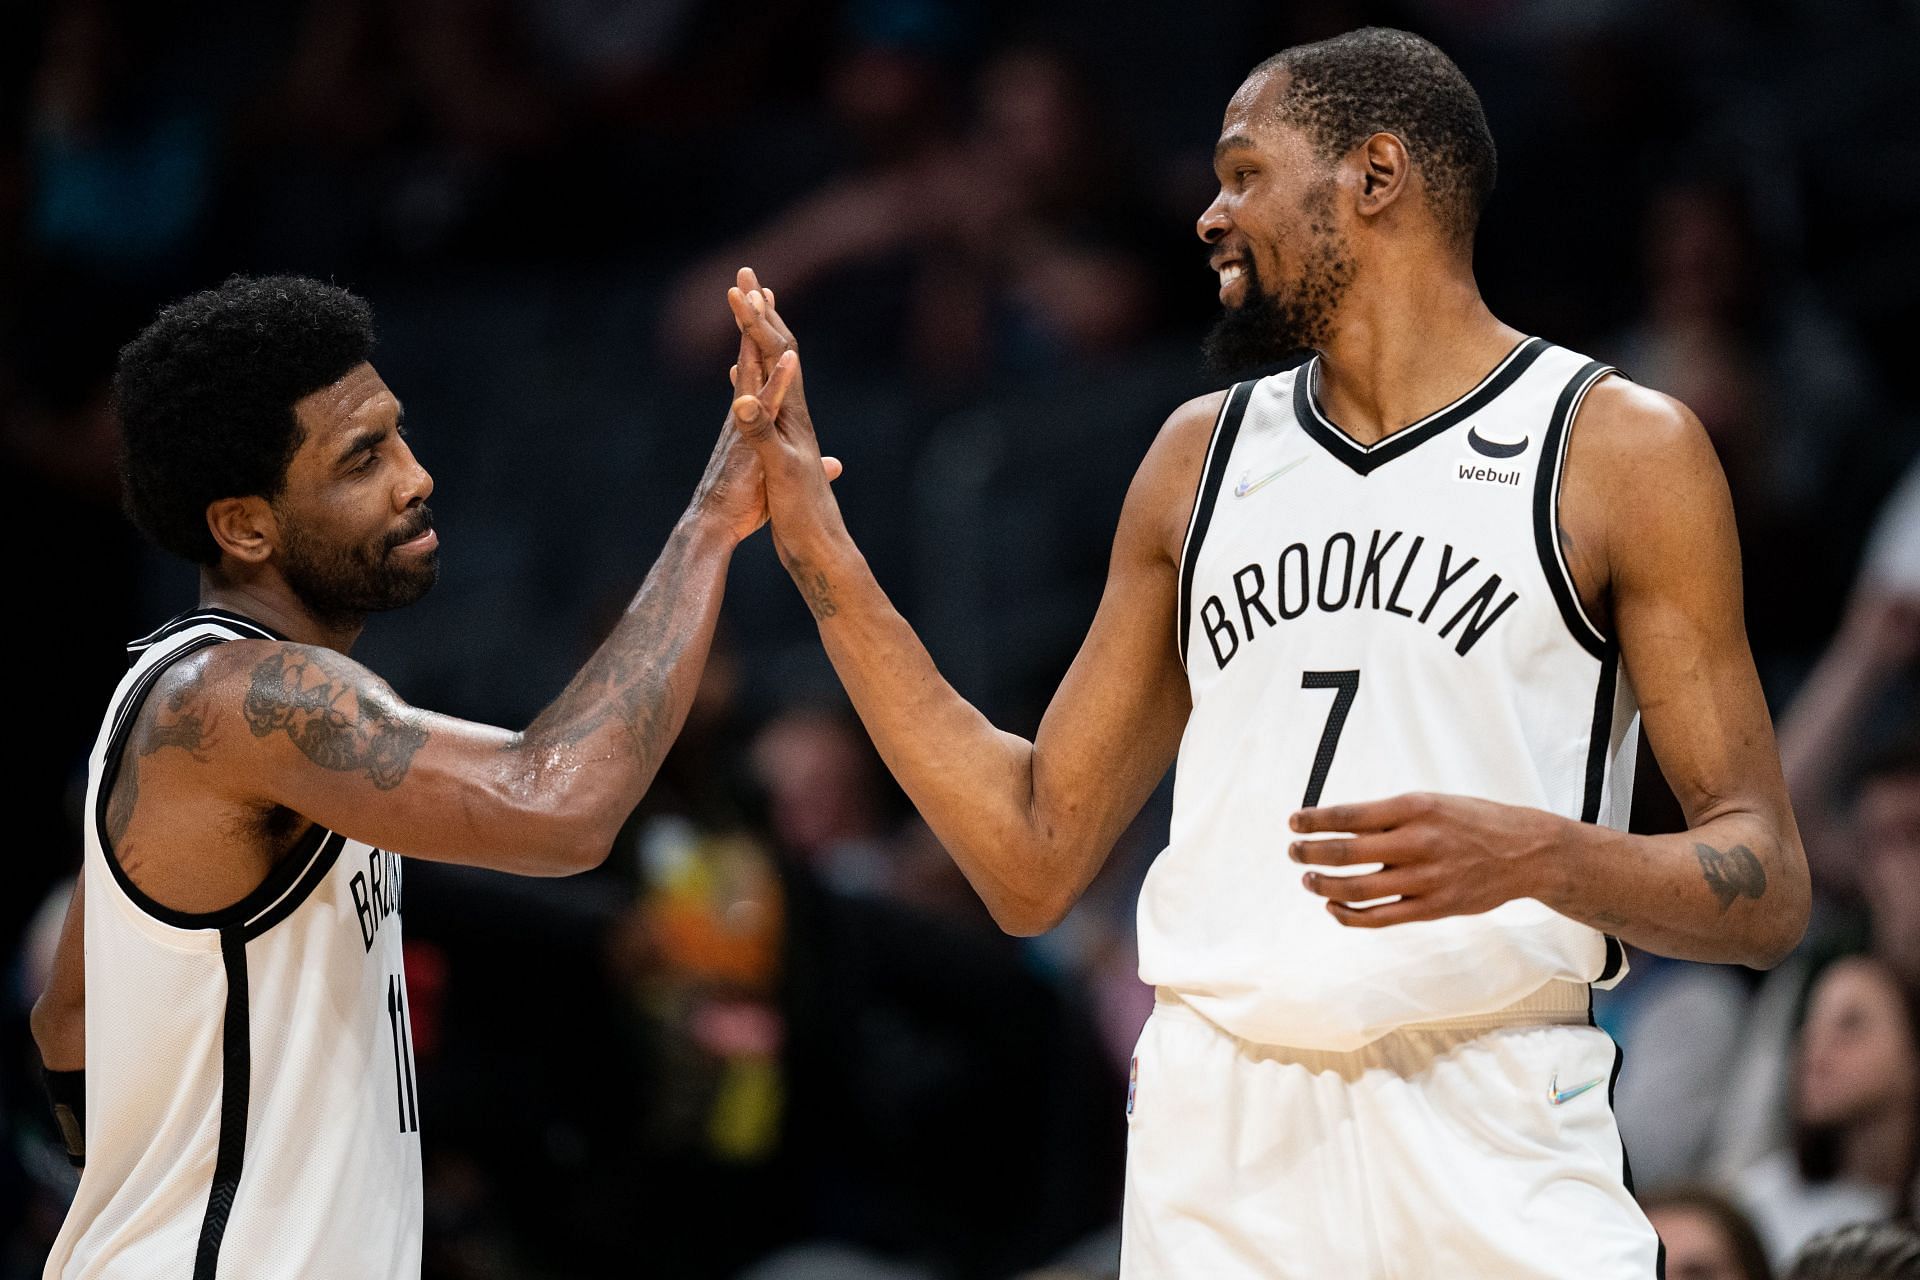 The two talismanic figures of the Brooklyn Nets